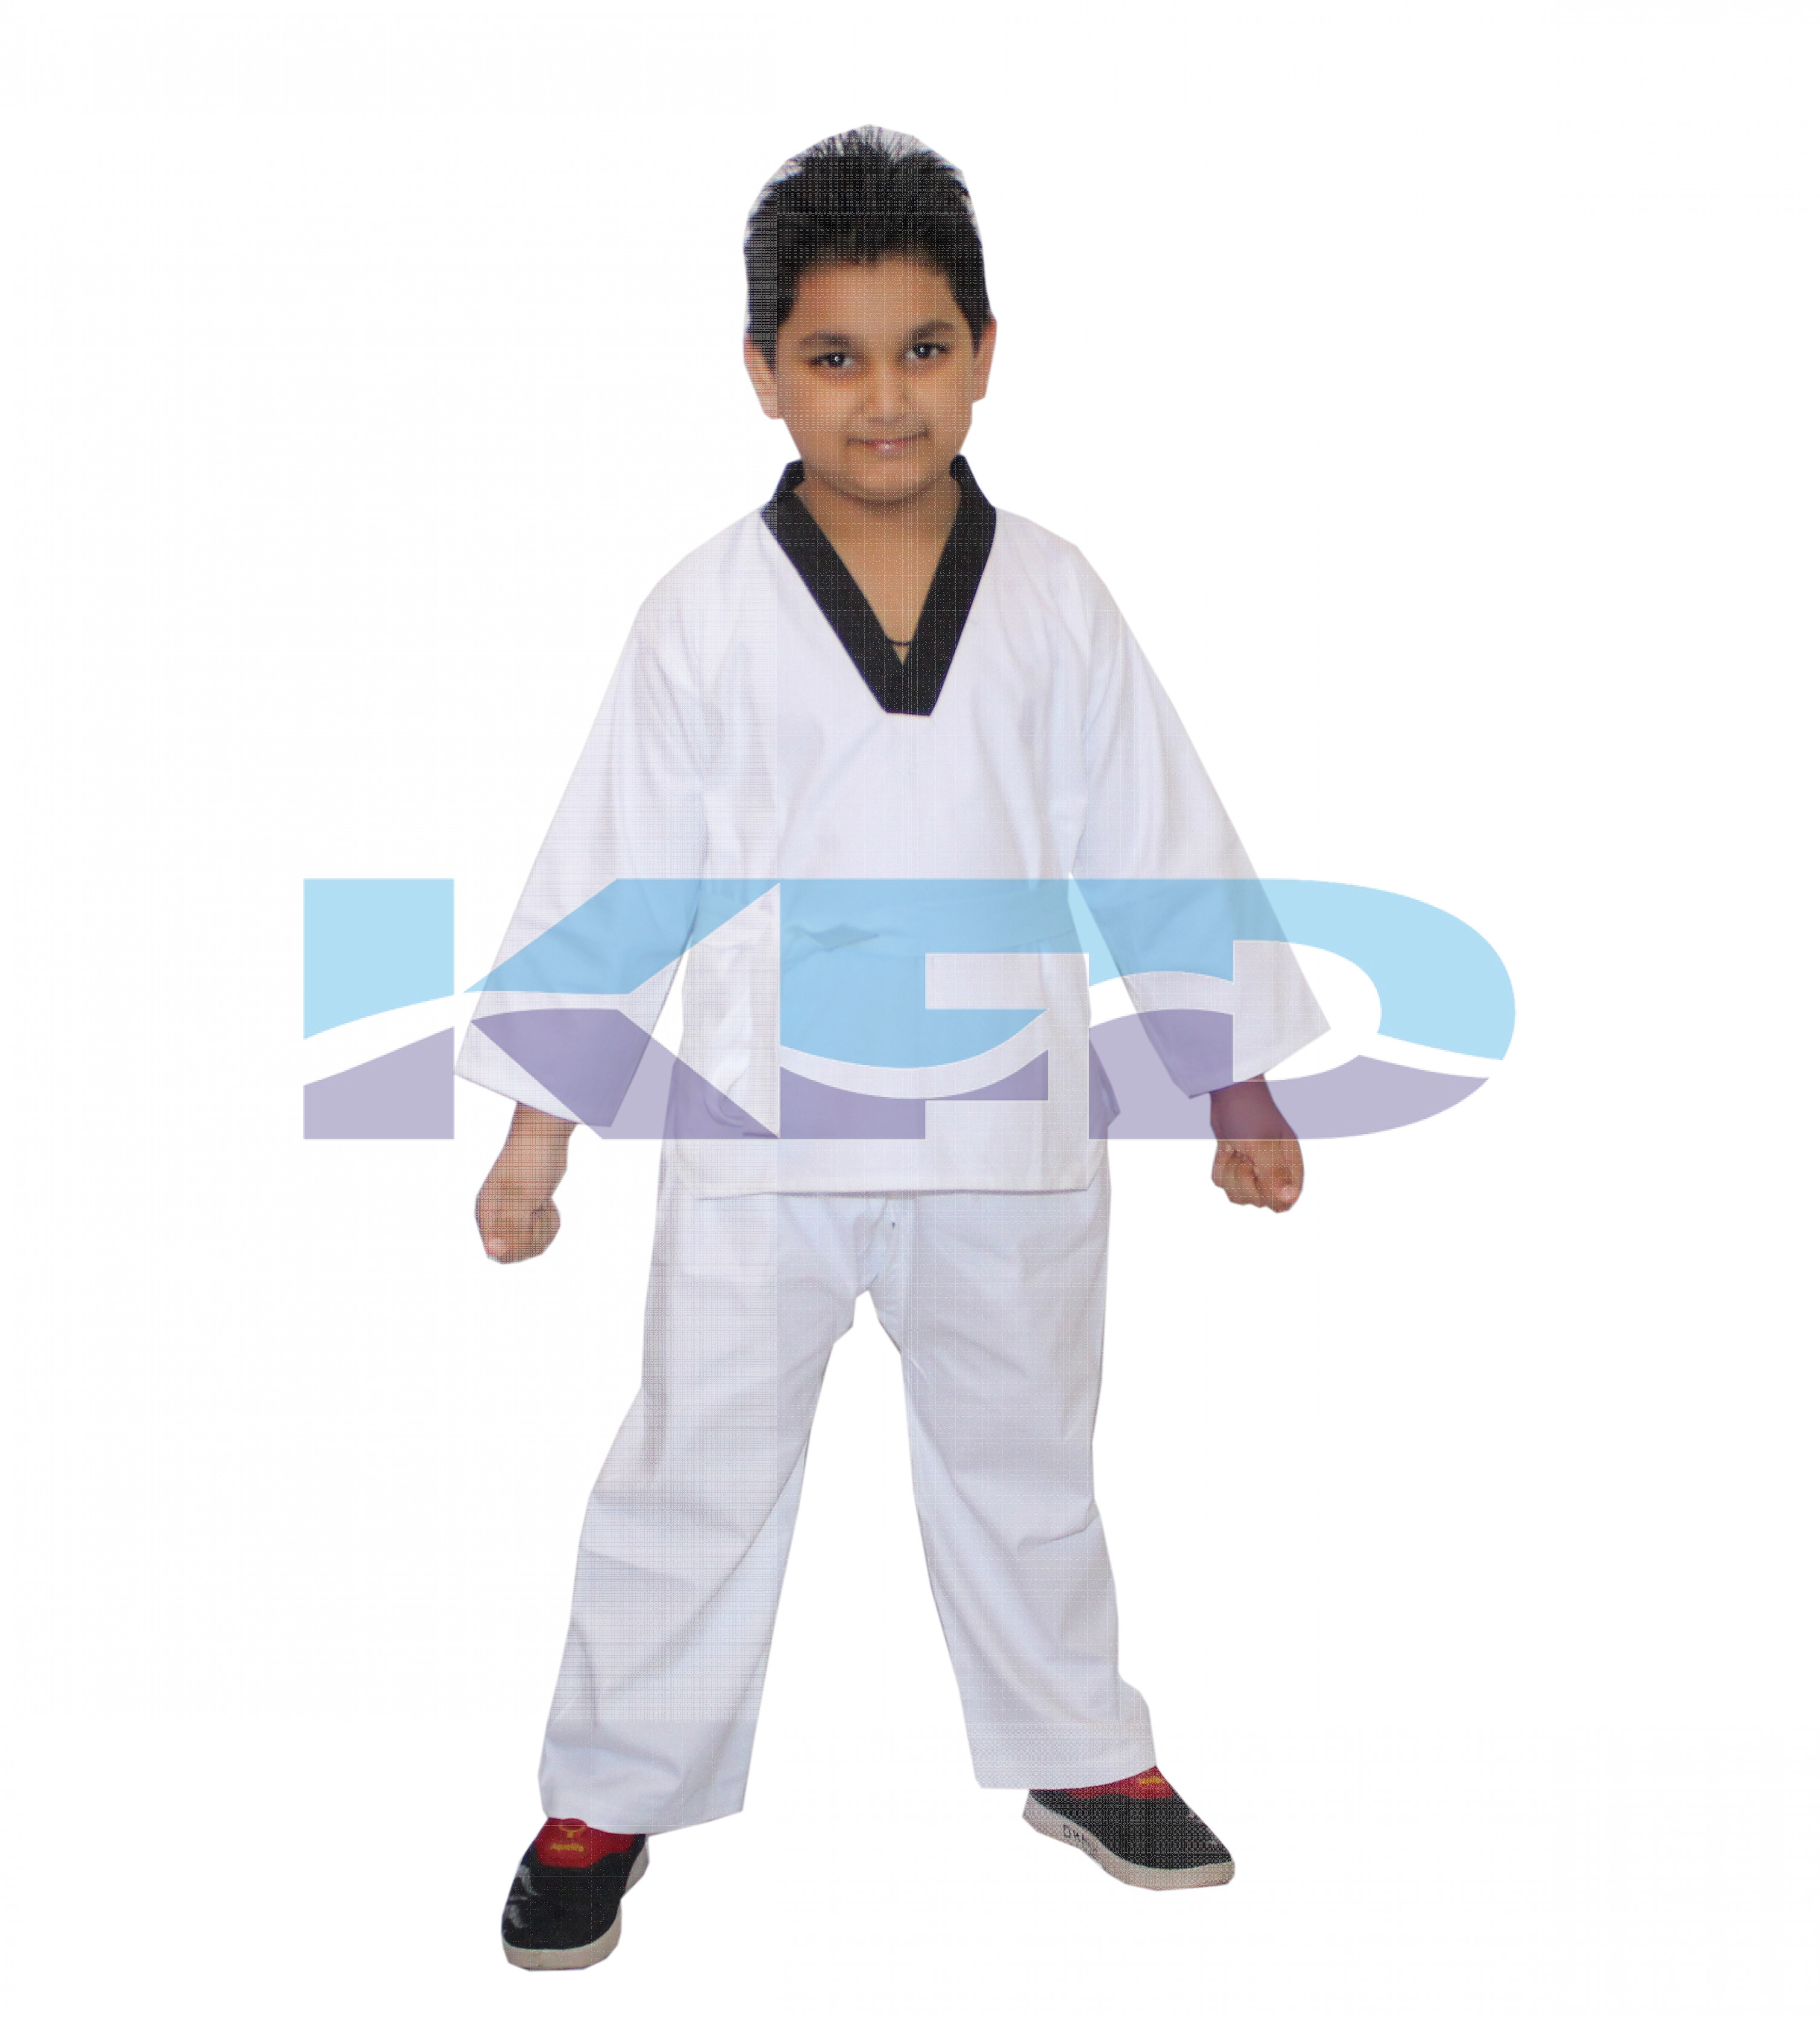 Taikando fancy dress for kids,Martial Art/Fighting Costume for School Annual function/Theme Party/Competition/Stage Shows Dress